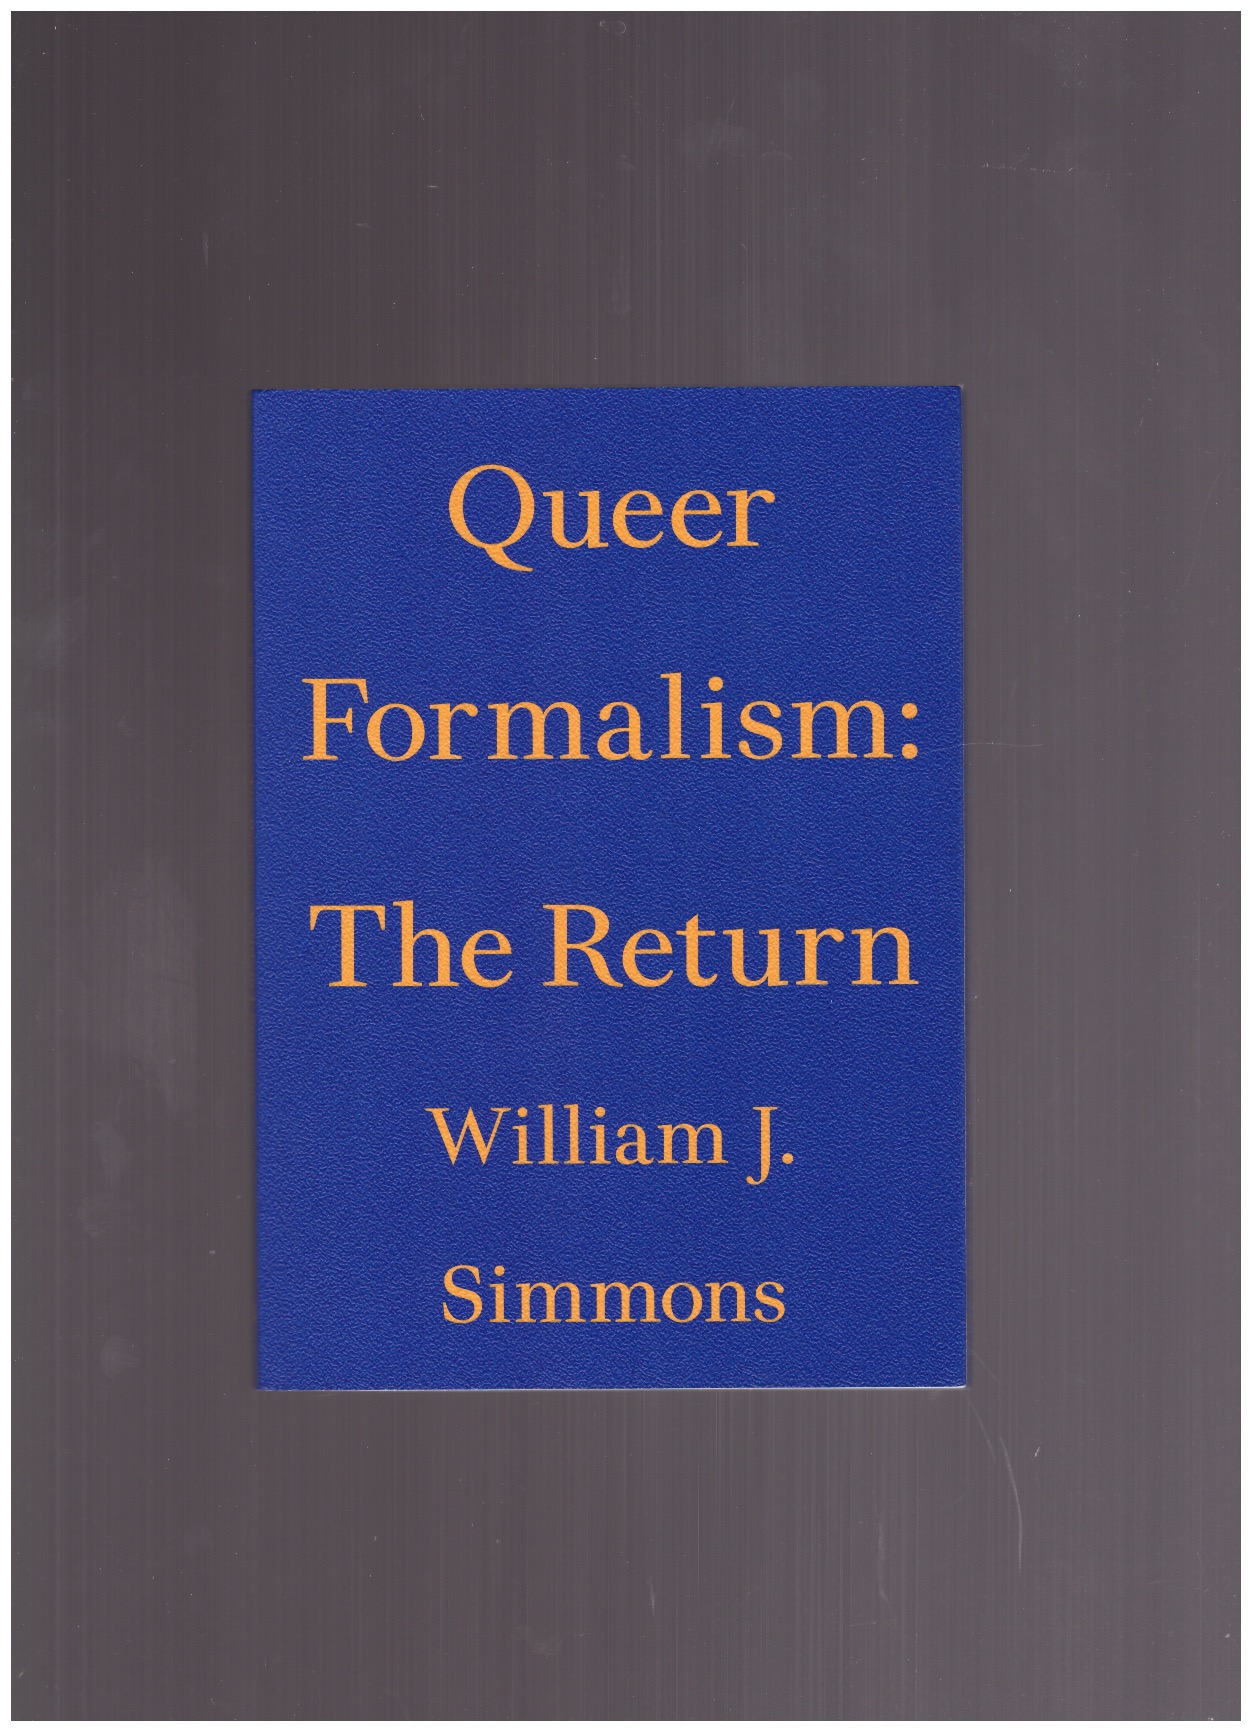 SIMMONS, William J. - Queer Formalism: The Return